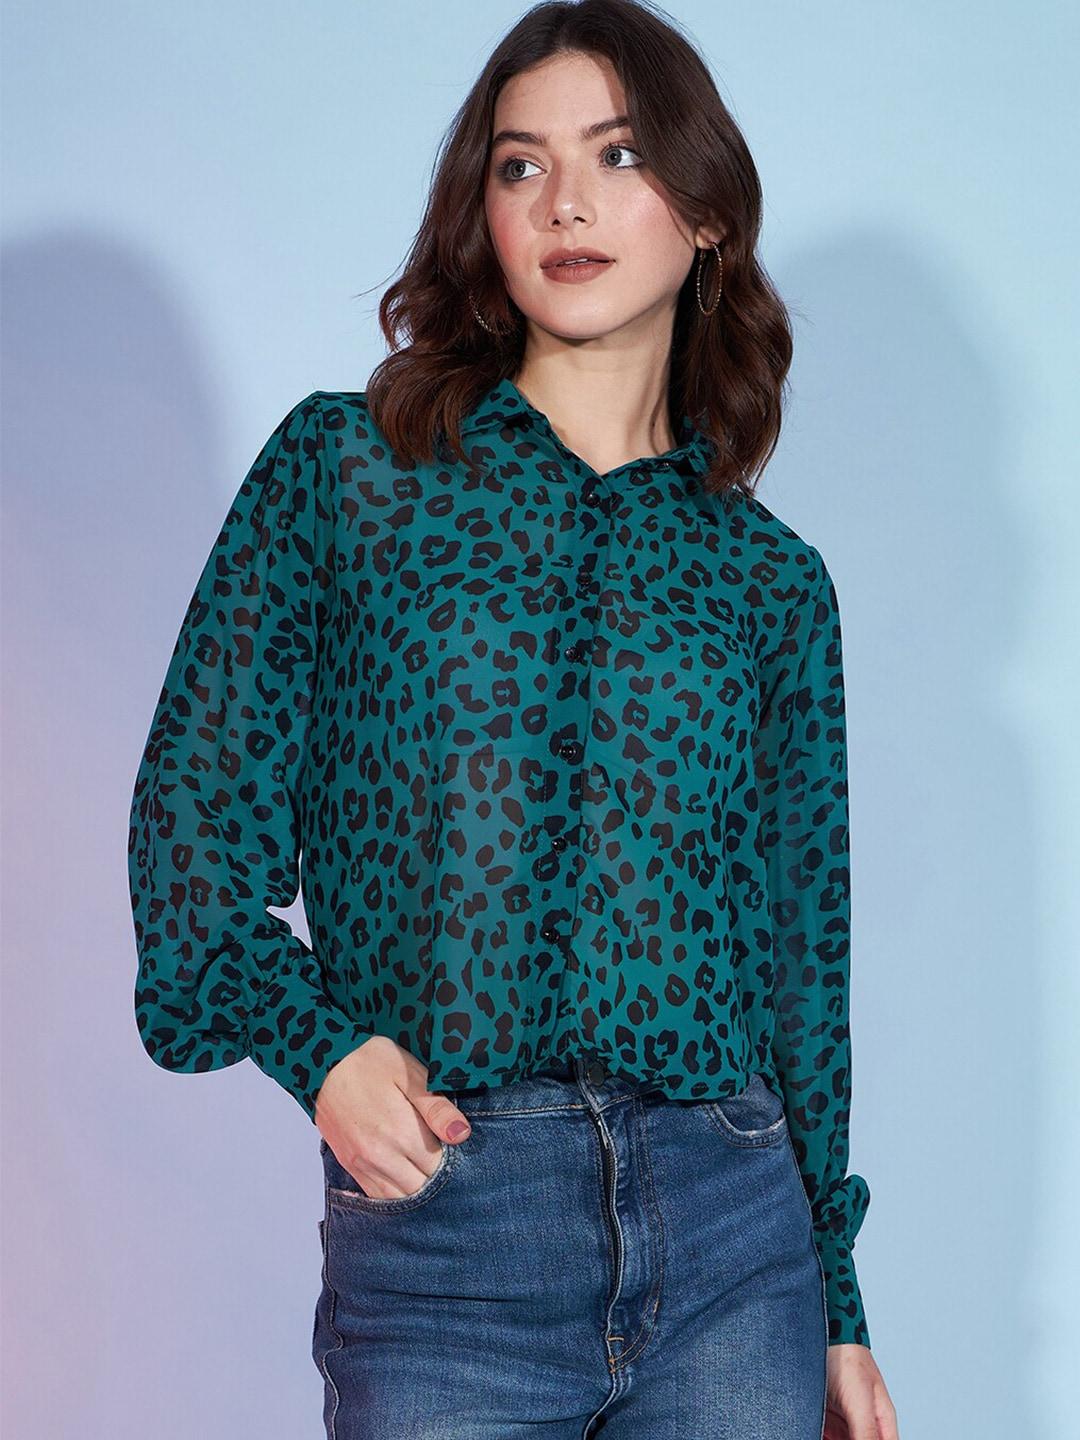 dressberry-teal-animal-print-georgette-shirt-style-top